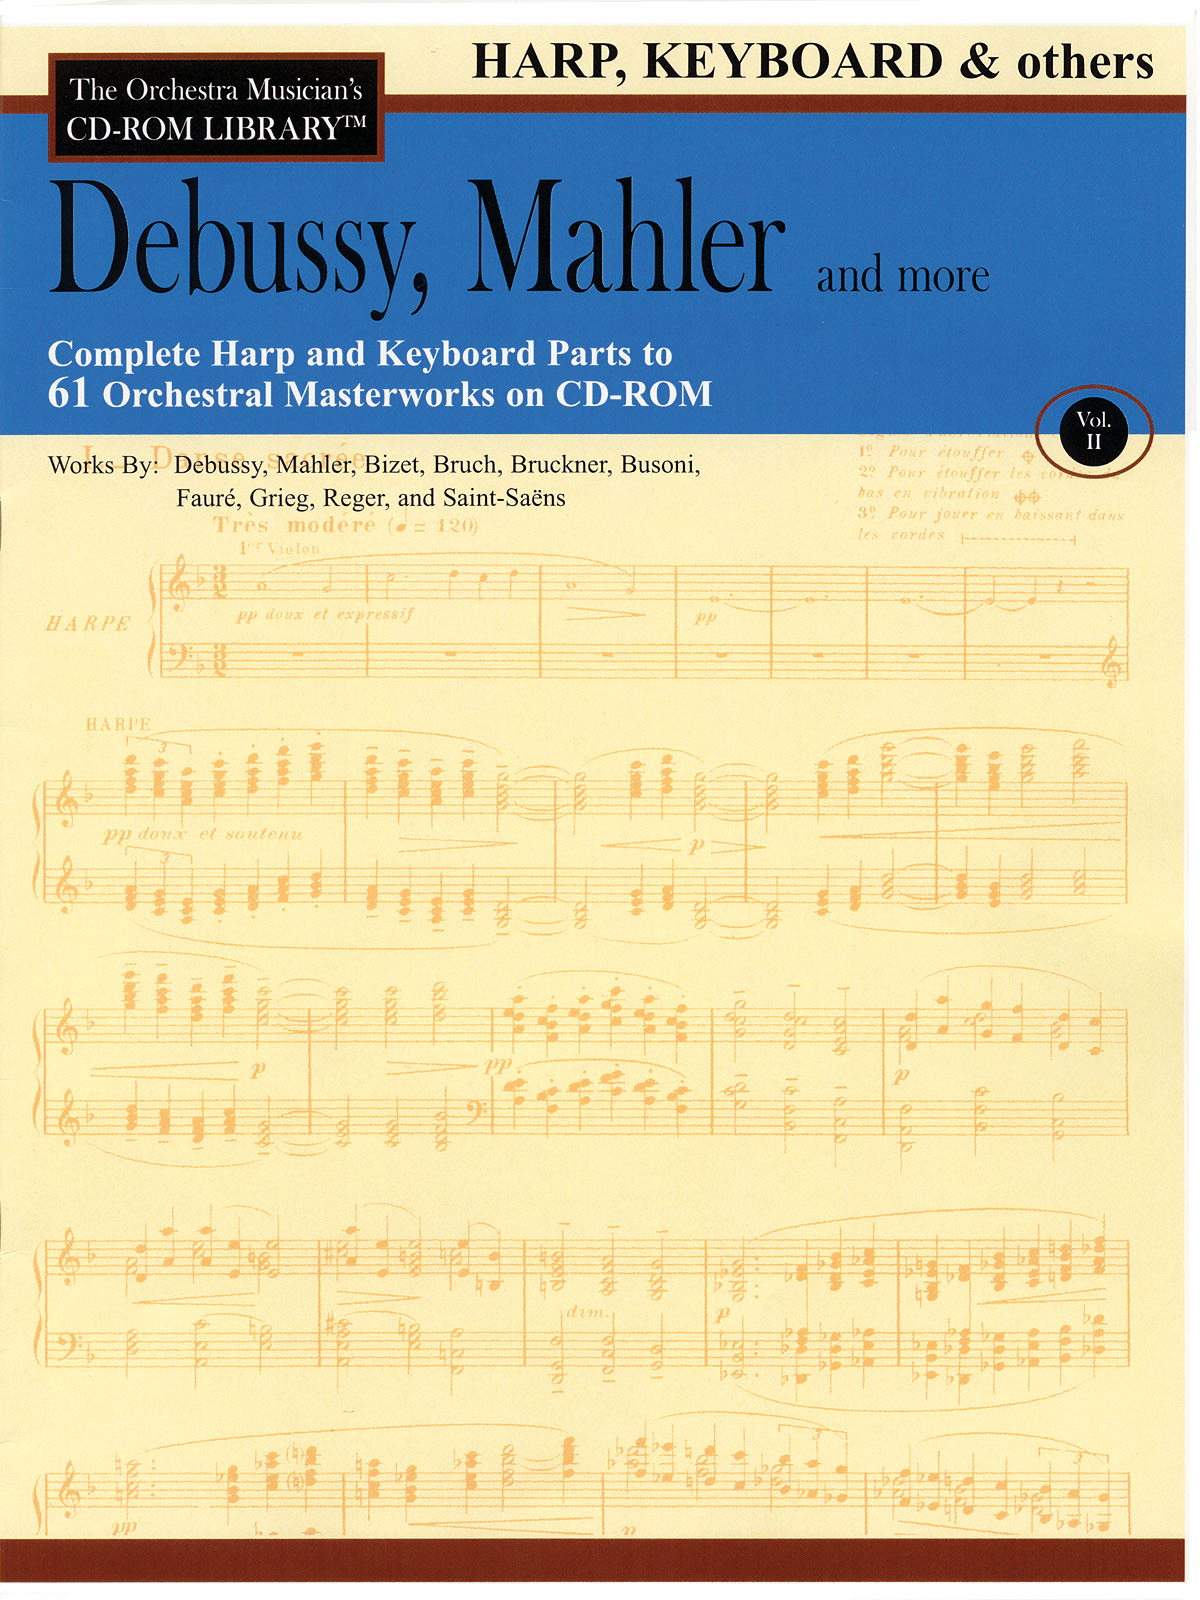 Debussy, Mahler and More - Volume 2(The Orchestra Musician's CD-ROM Library - Harp, Keyboard & Other